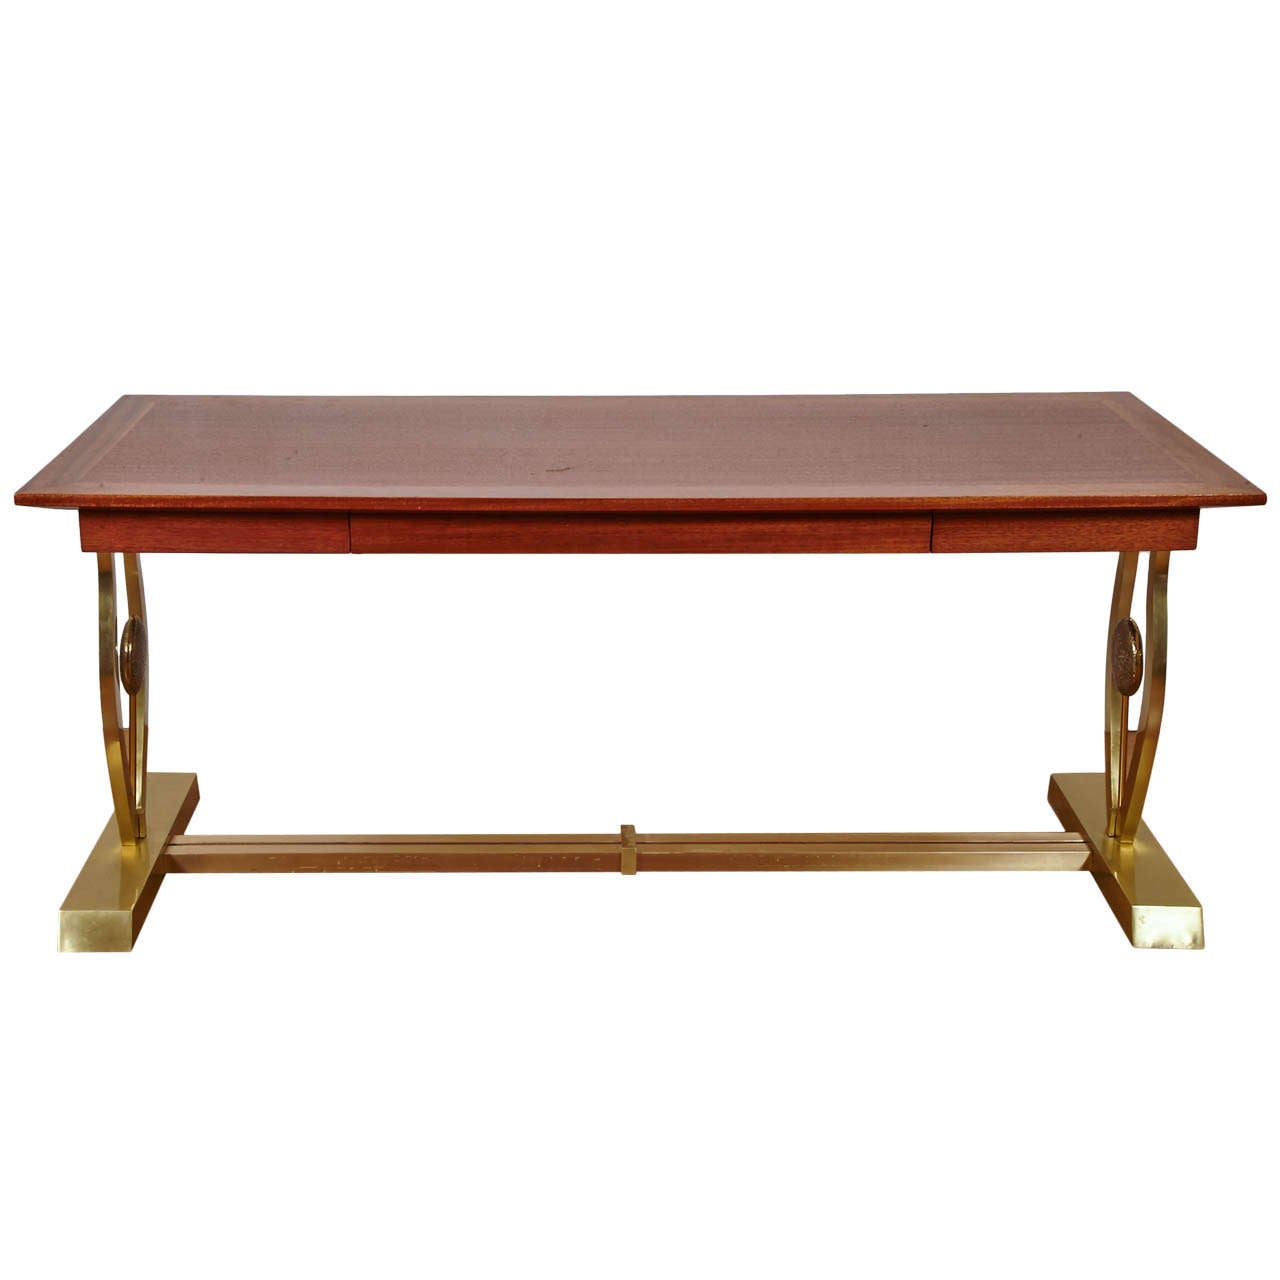 A rare elegant rectangular console or desk table, with a mahogany top with drawer and gilt brass and wood base with lyre sides, by Maison Jansen, 70's.
Height. 28,3 x width 68,5 x depth 28,7 inches.